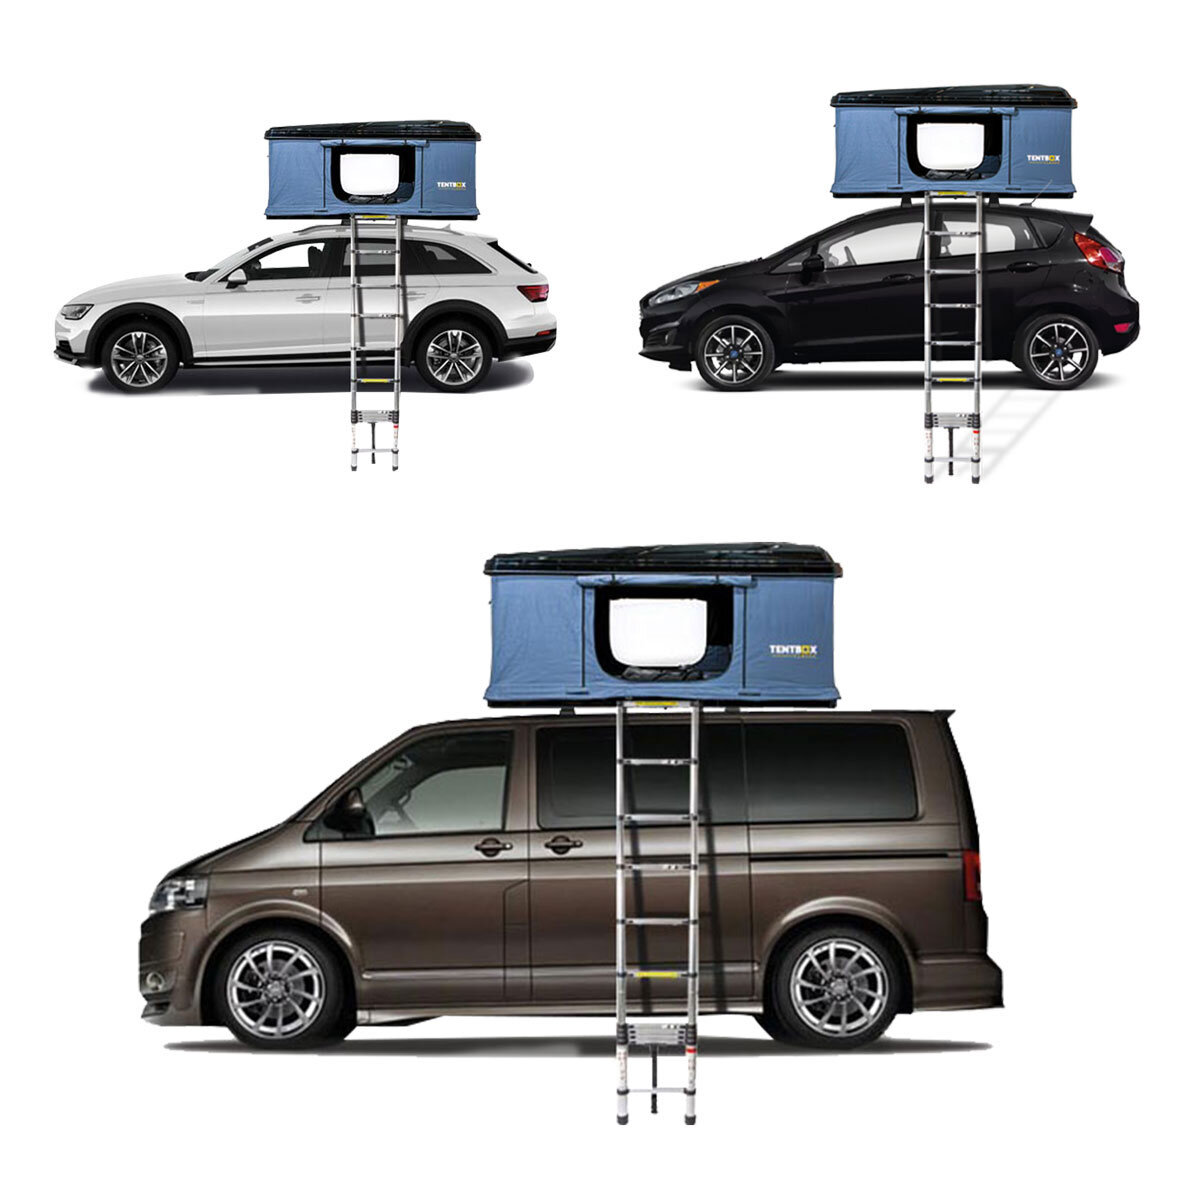 image of tentbox on 3 different cars